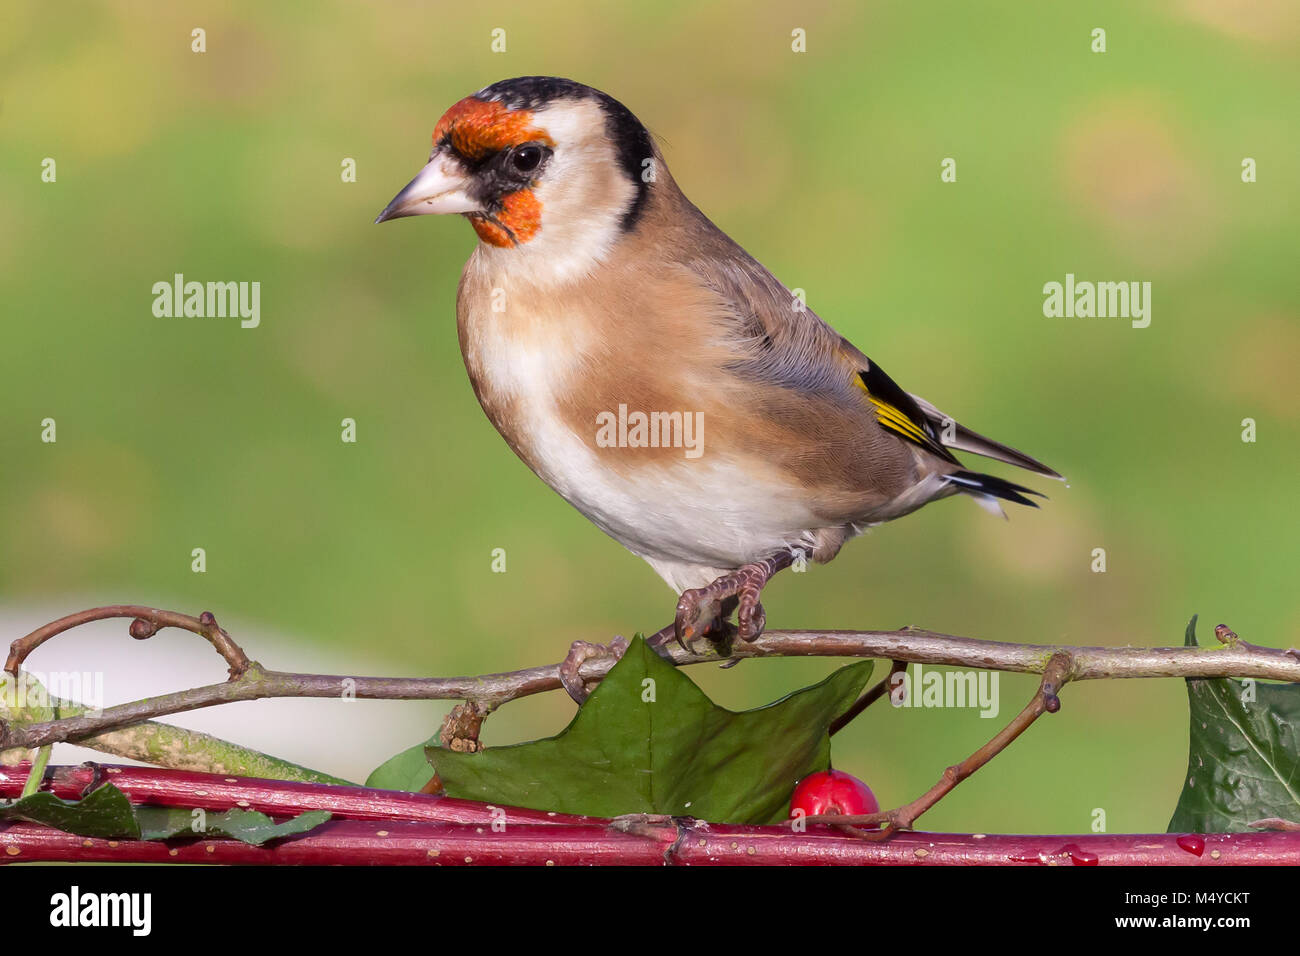 Wild goldfinch bird portrait close up native to Europe also known as Carduelis carduelis. The goldfinch has a red face and a black-and-white head. Mal Stock Photo